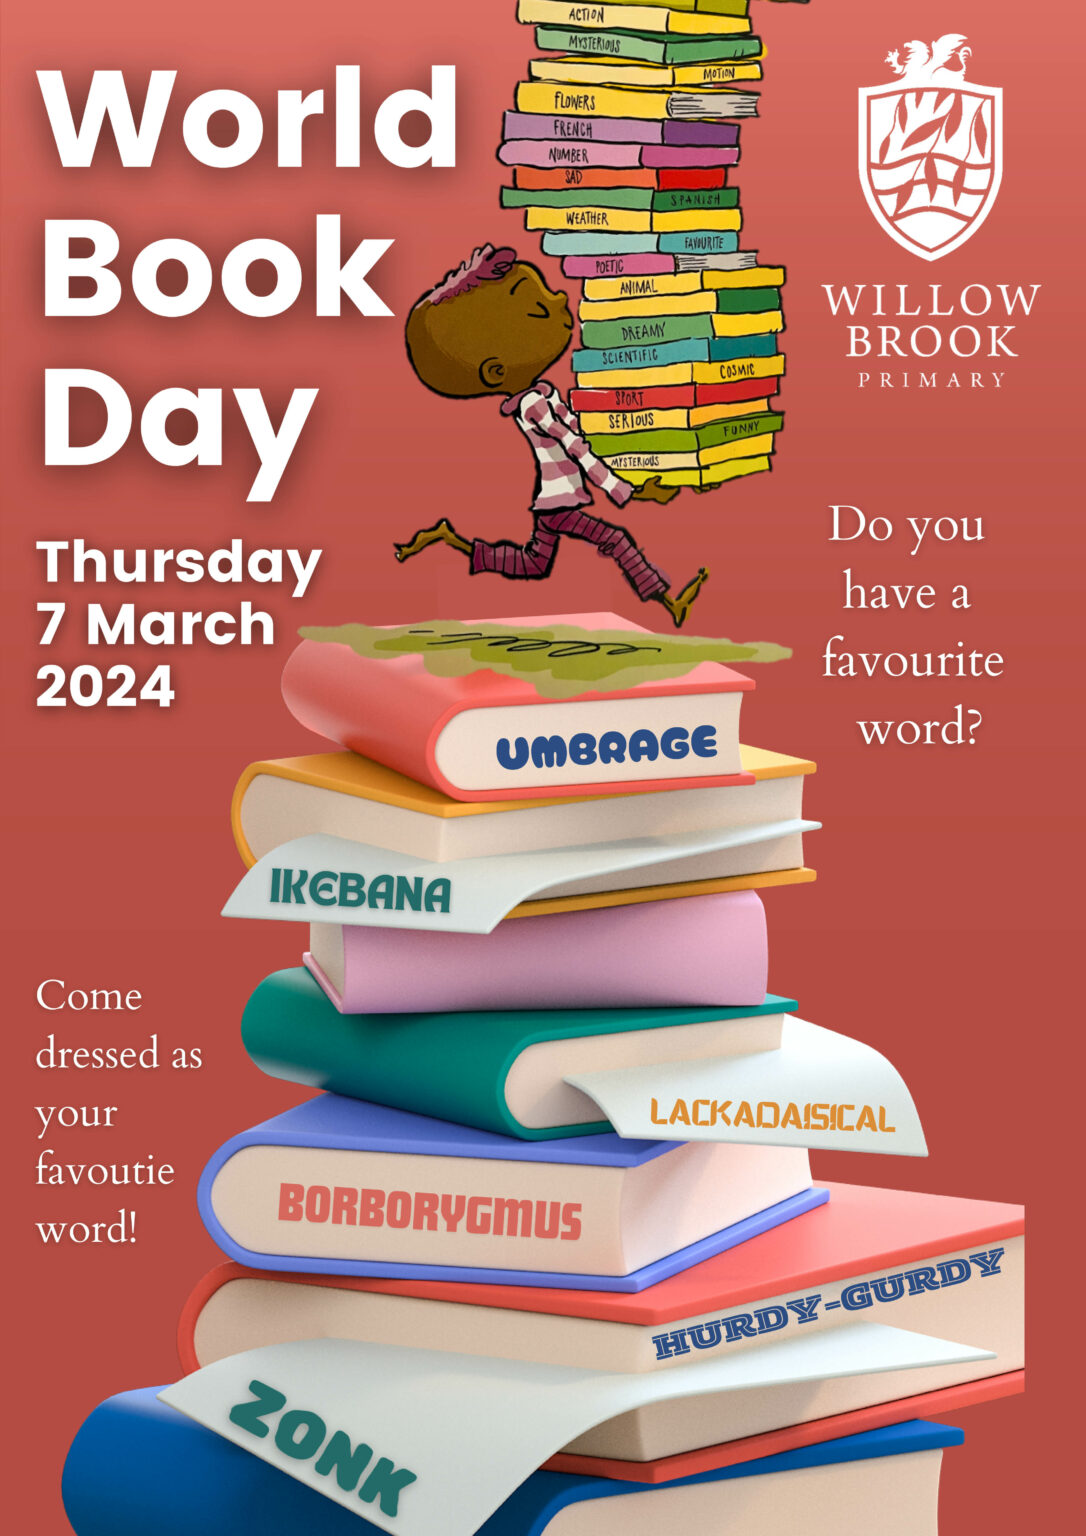 World Book Day 2024 Willow Brook Primary